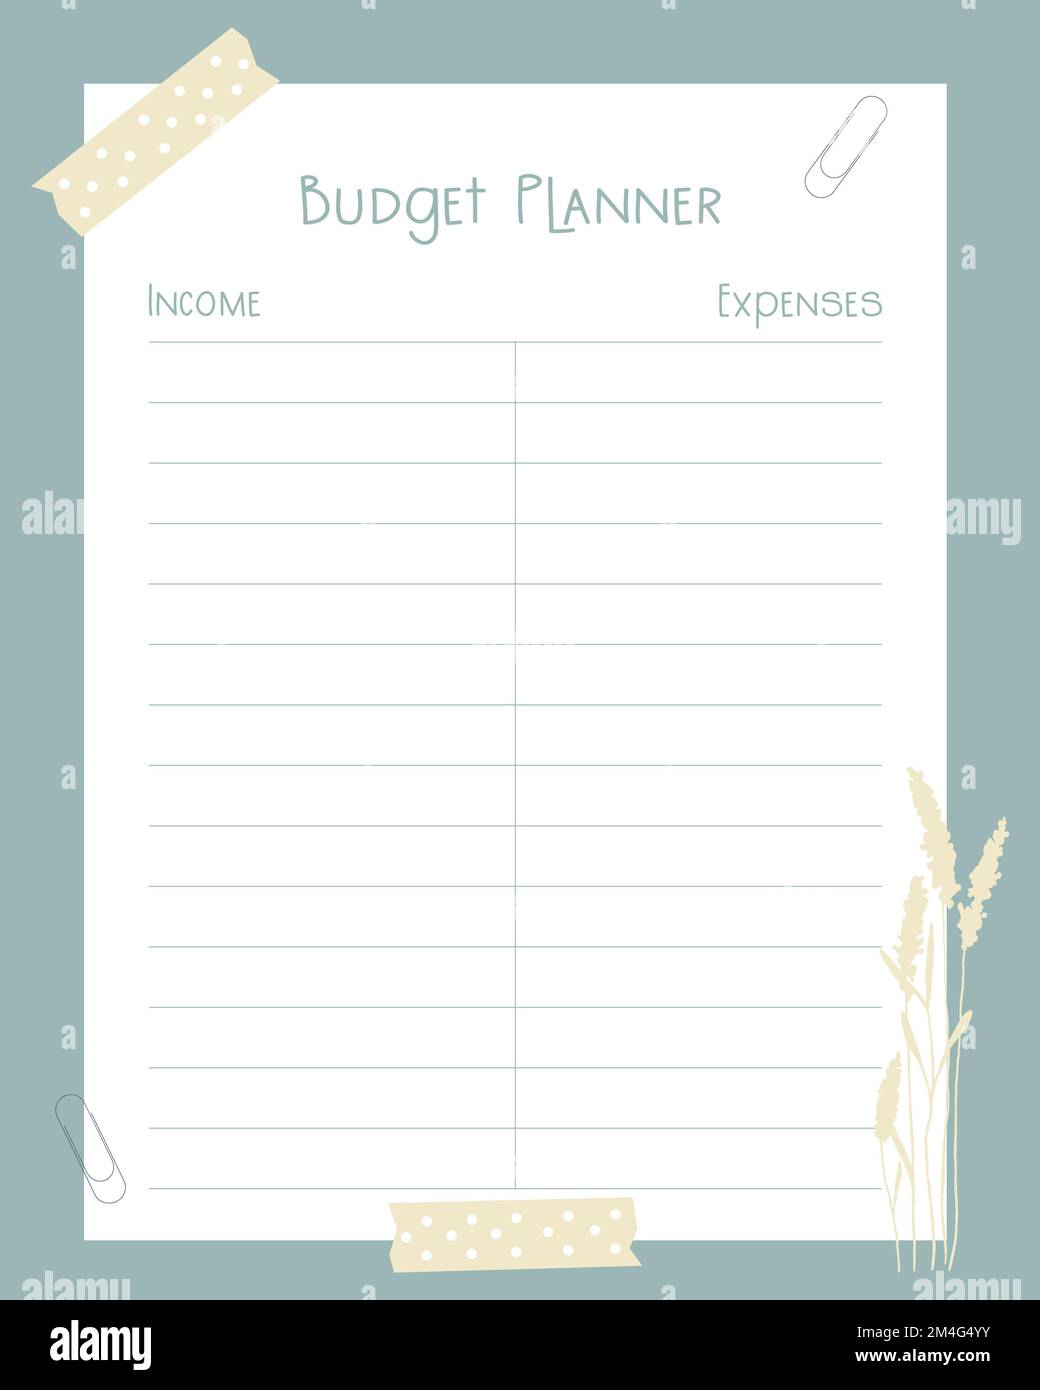 Budget planner template page design with leaves monstera, income and expenses. Vector illustration Stock Vector